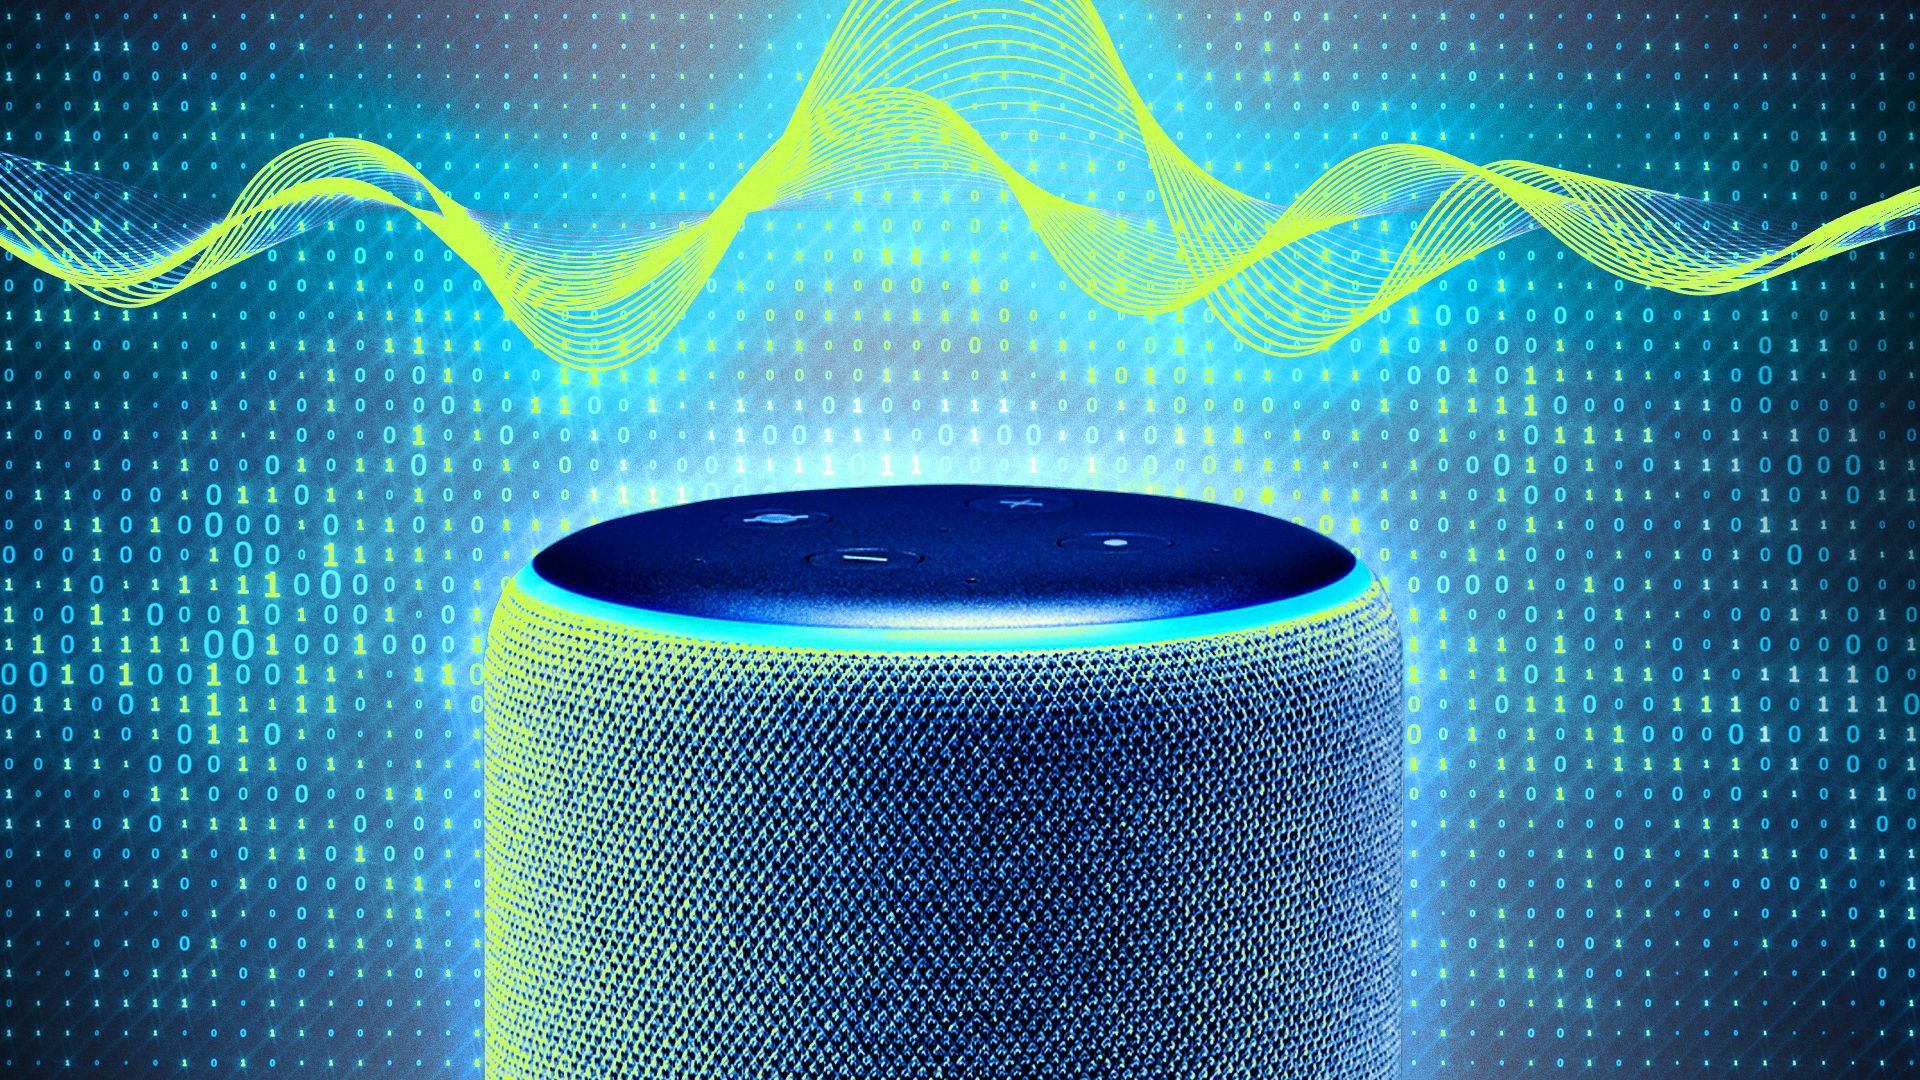 Photo illustration of an Amazon Echo smart speaker on a background with glowing binary code and sound waves.